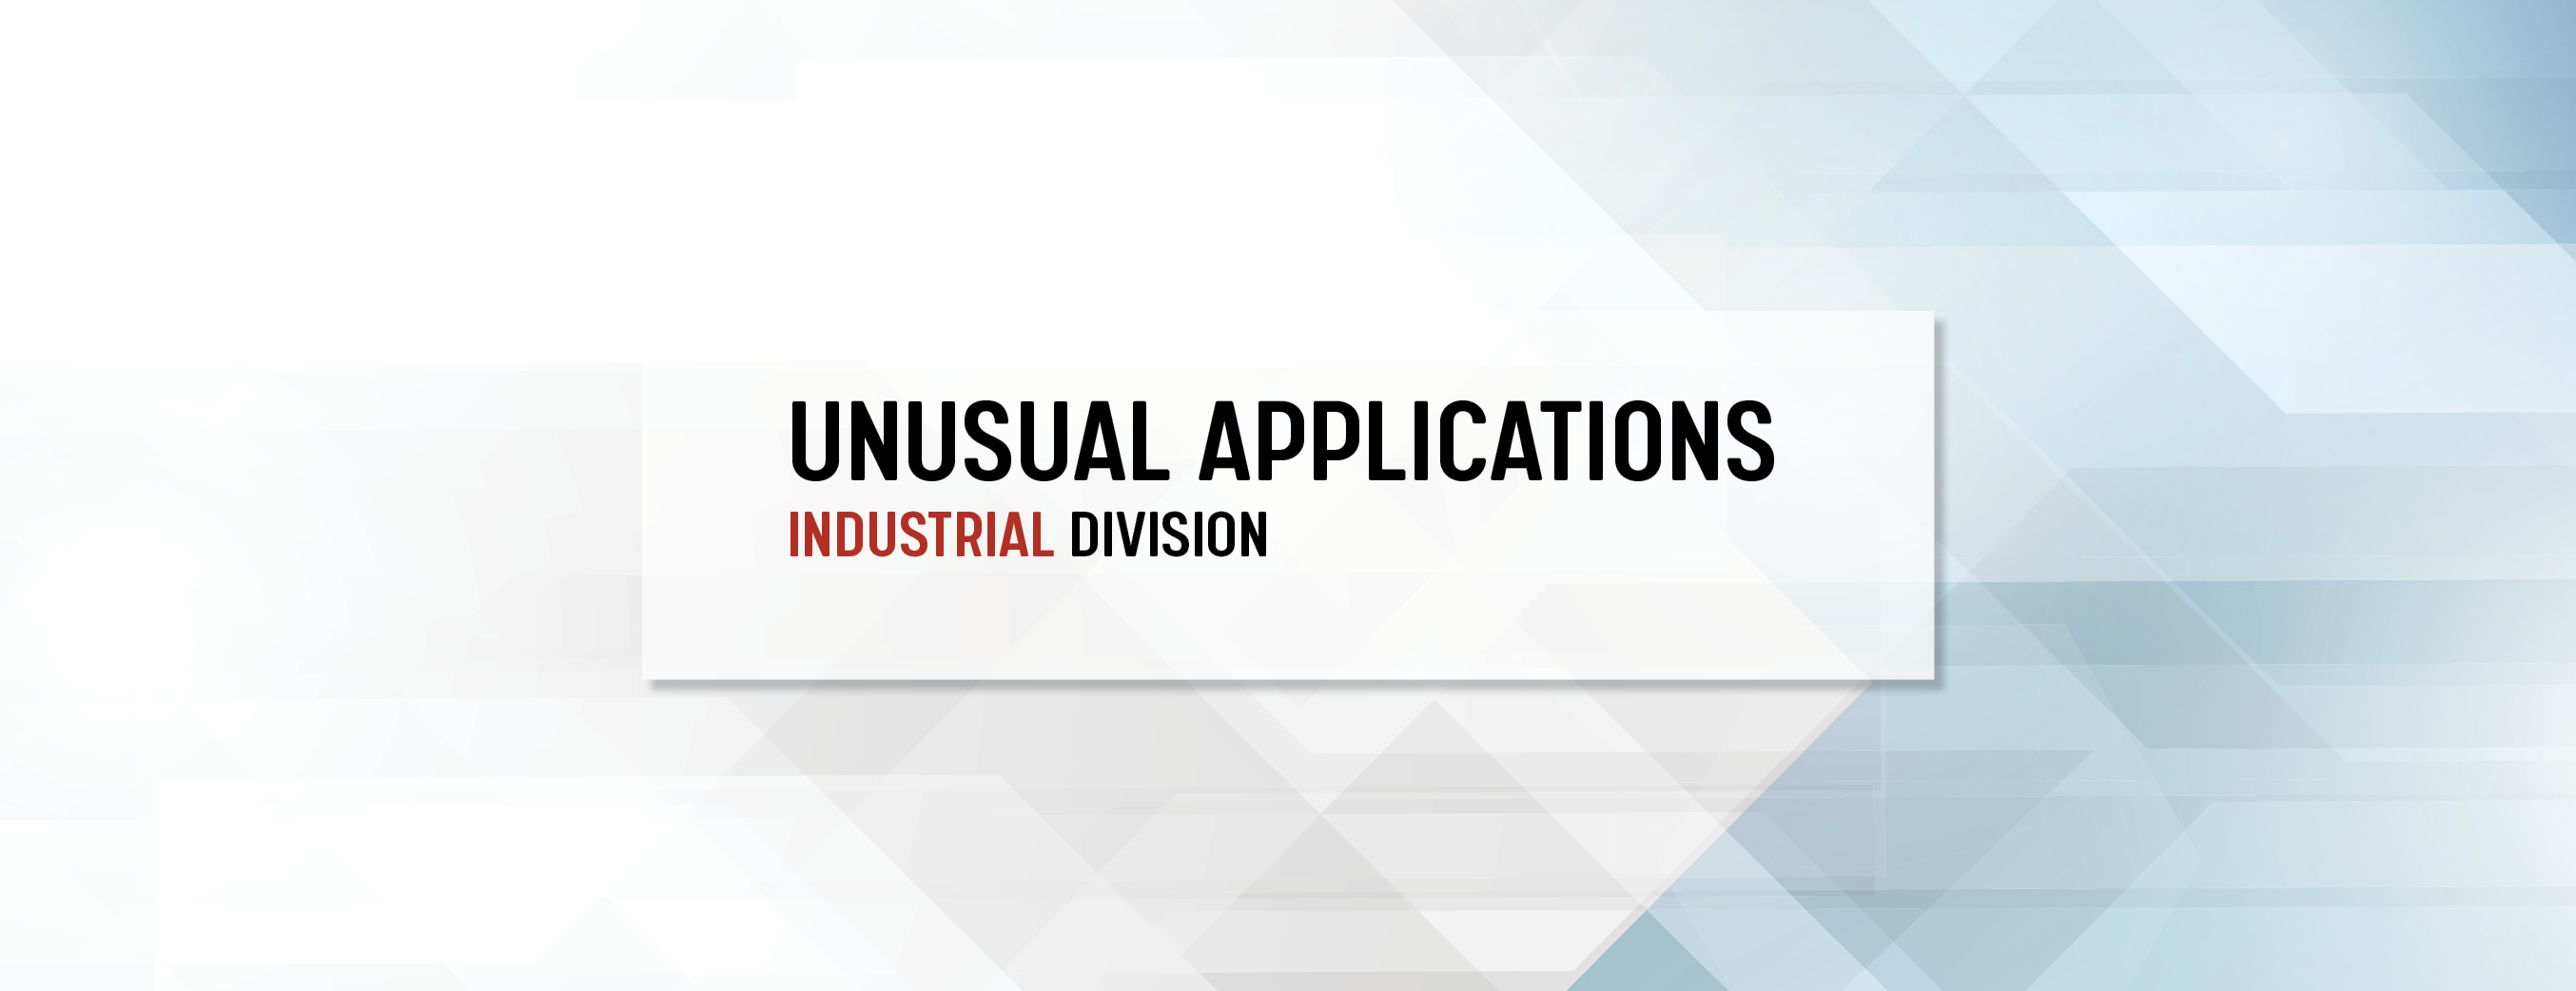  UNUSUAL APPLICATIONS IND